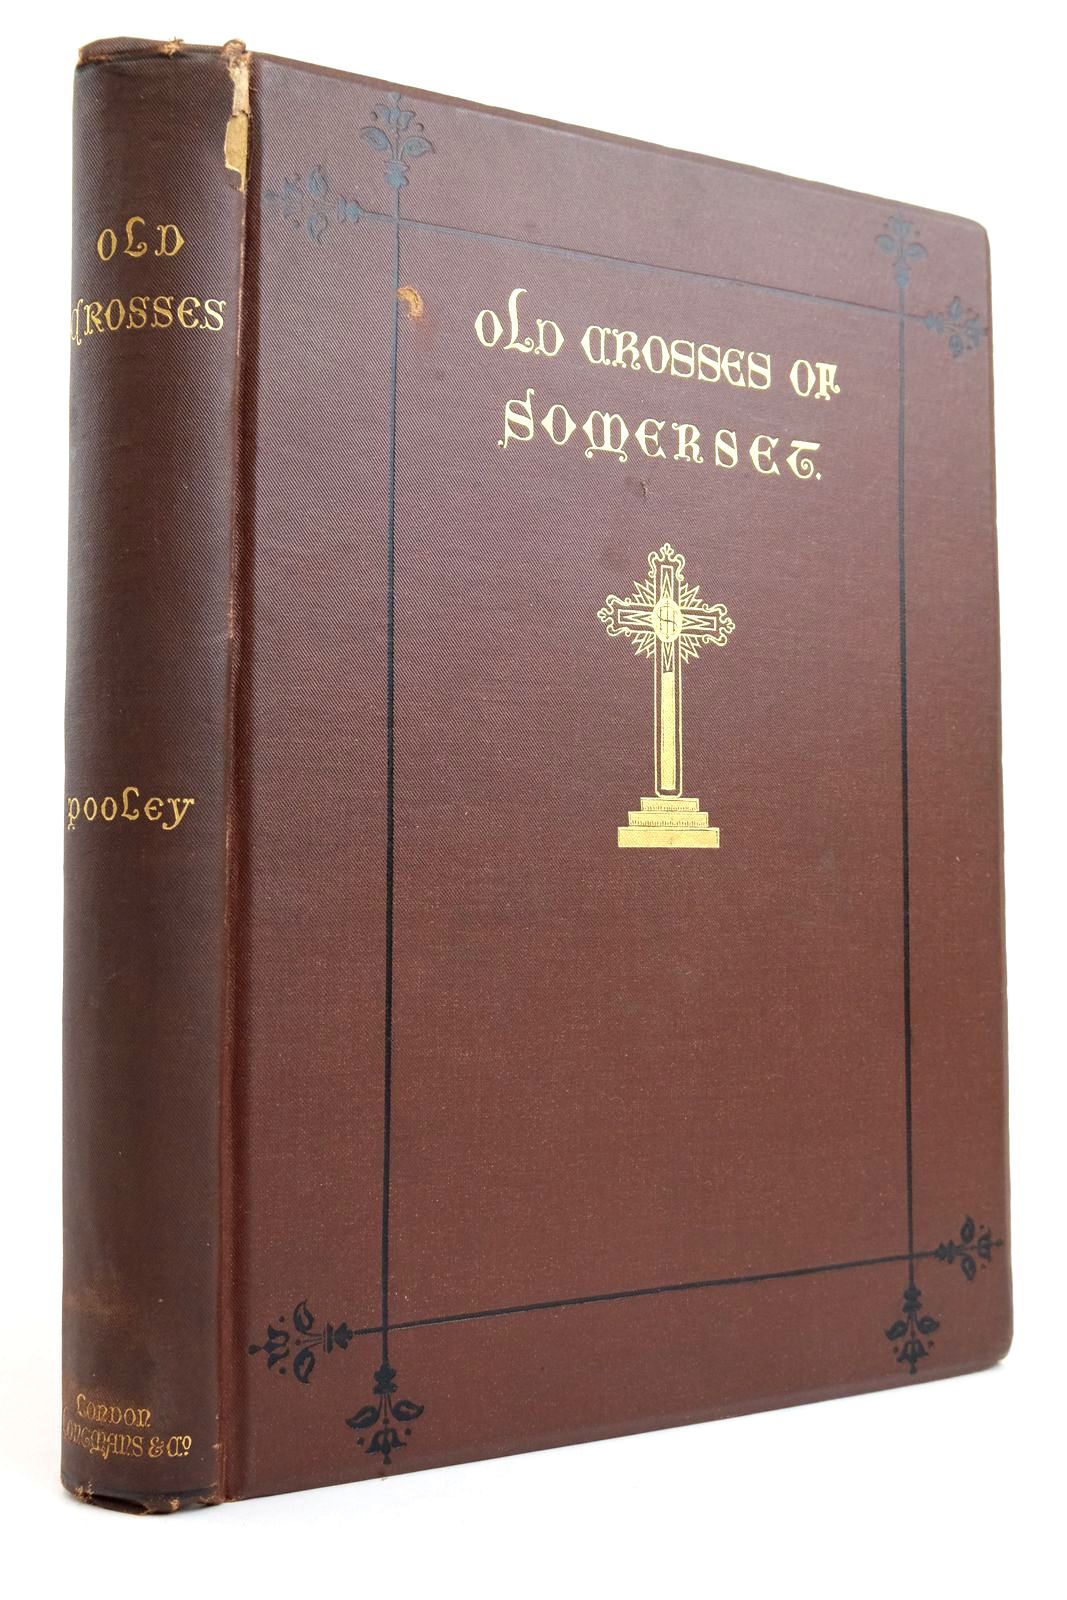 Photo of AN HISTORICAL AND DESCRIPTIVE ACCOUNT OF THE OLD STONE CROSSES OF SOMERSET- Stock Number: 2135764